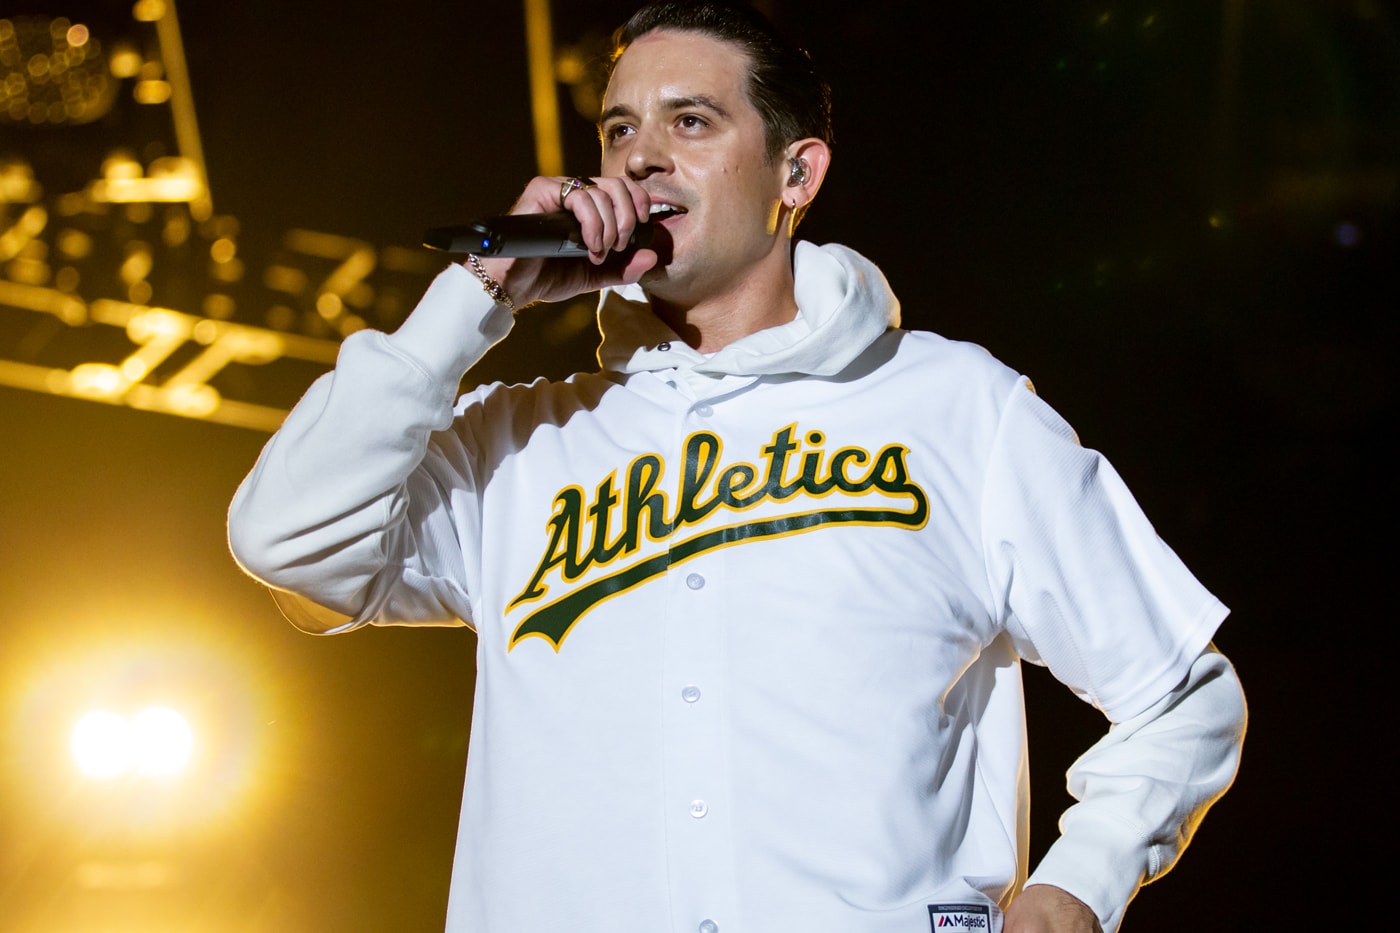 g-eazy-was-barely-able-to-fuel-his-tour-van-now-hes-meeting-kanye-west-playing-arenas